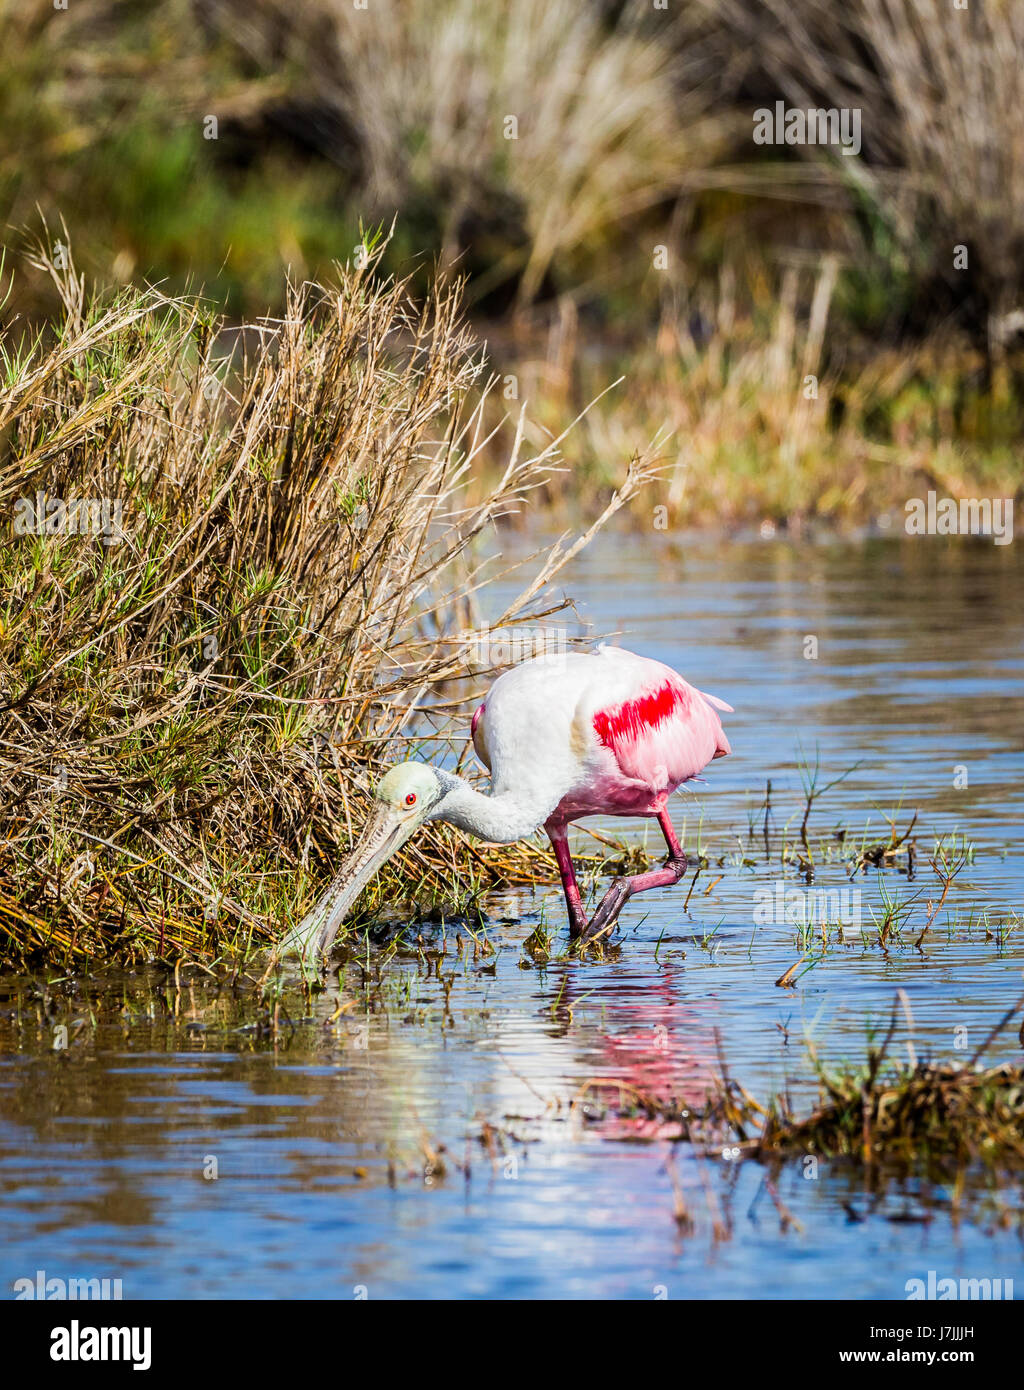 Roseate spoonbill feeds in natural Florida environment Stock Photo